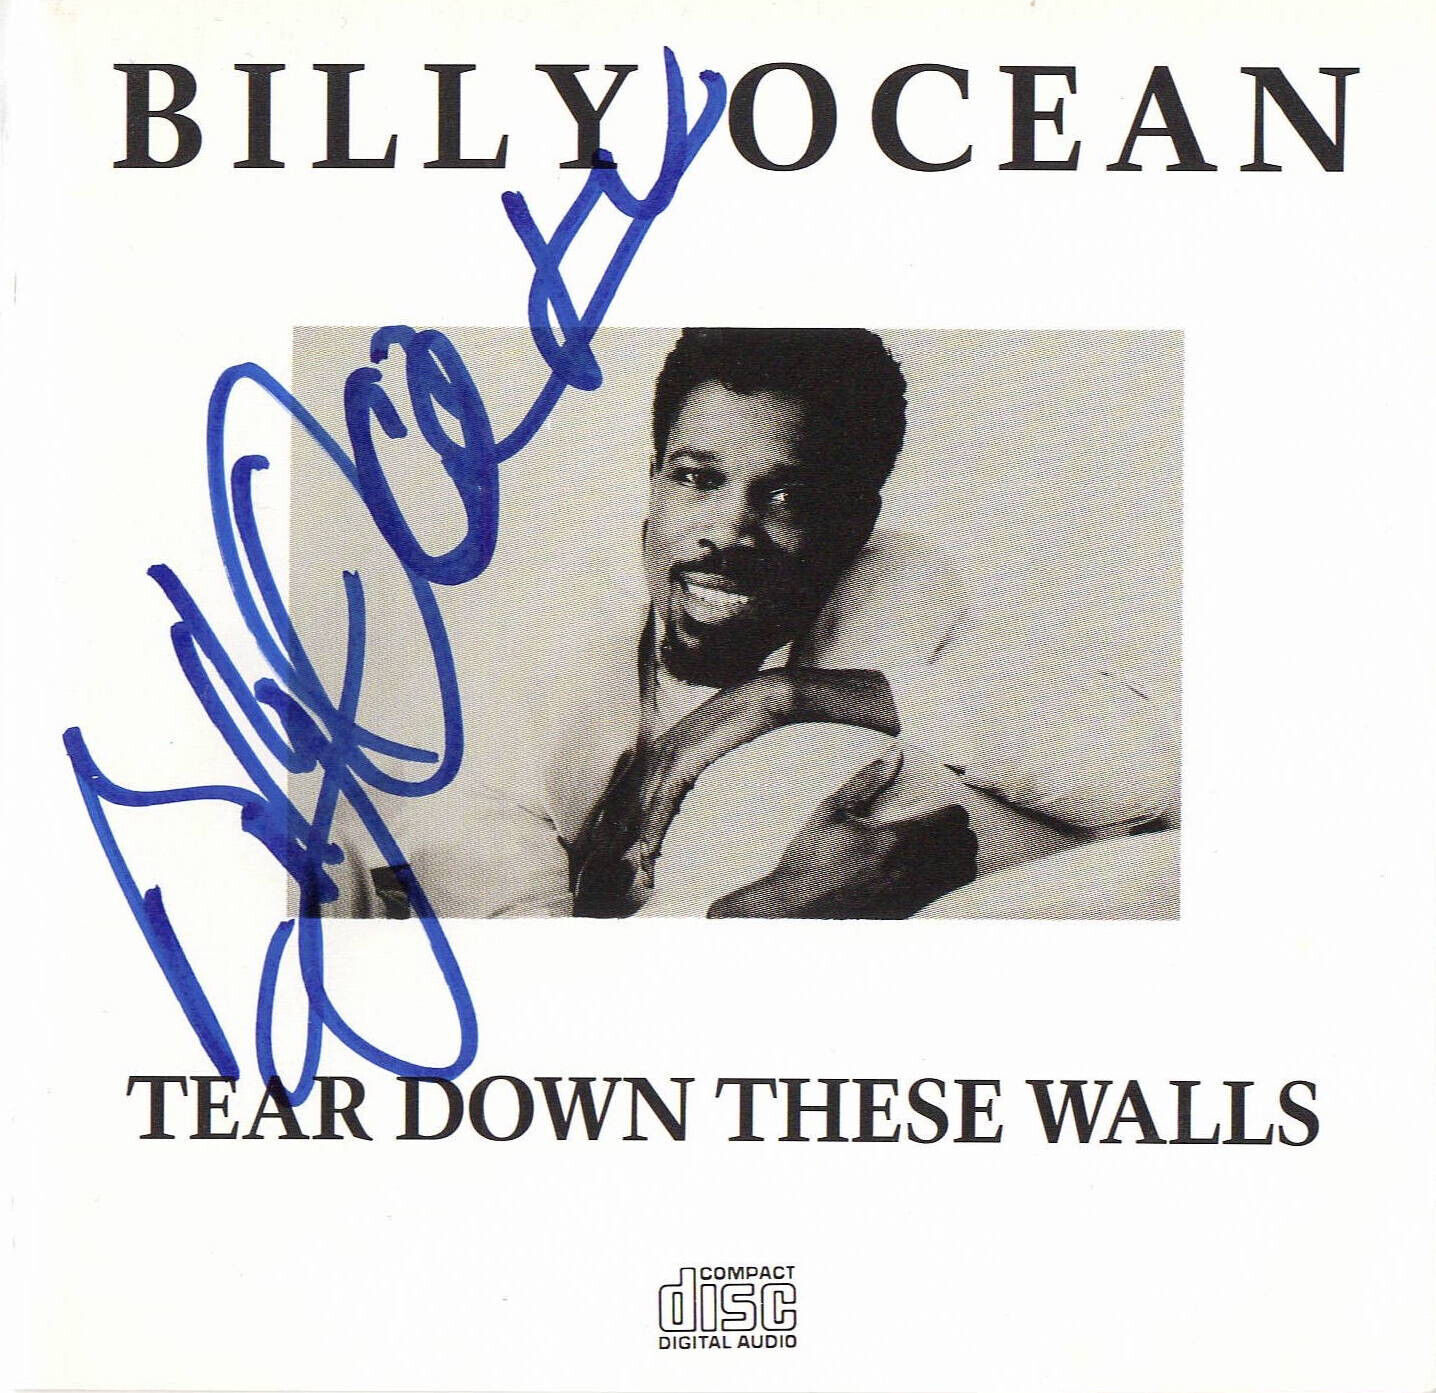 BILLY OCEAN SIGNED AUTOGRAPH TEAR DOWN THESE WALLS CD BOOKLET BECKETT BAS